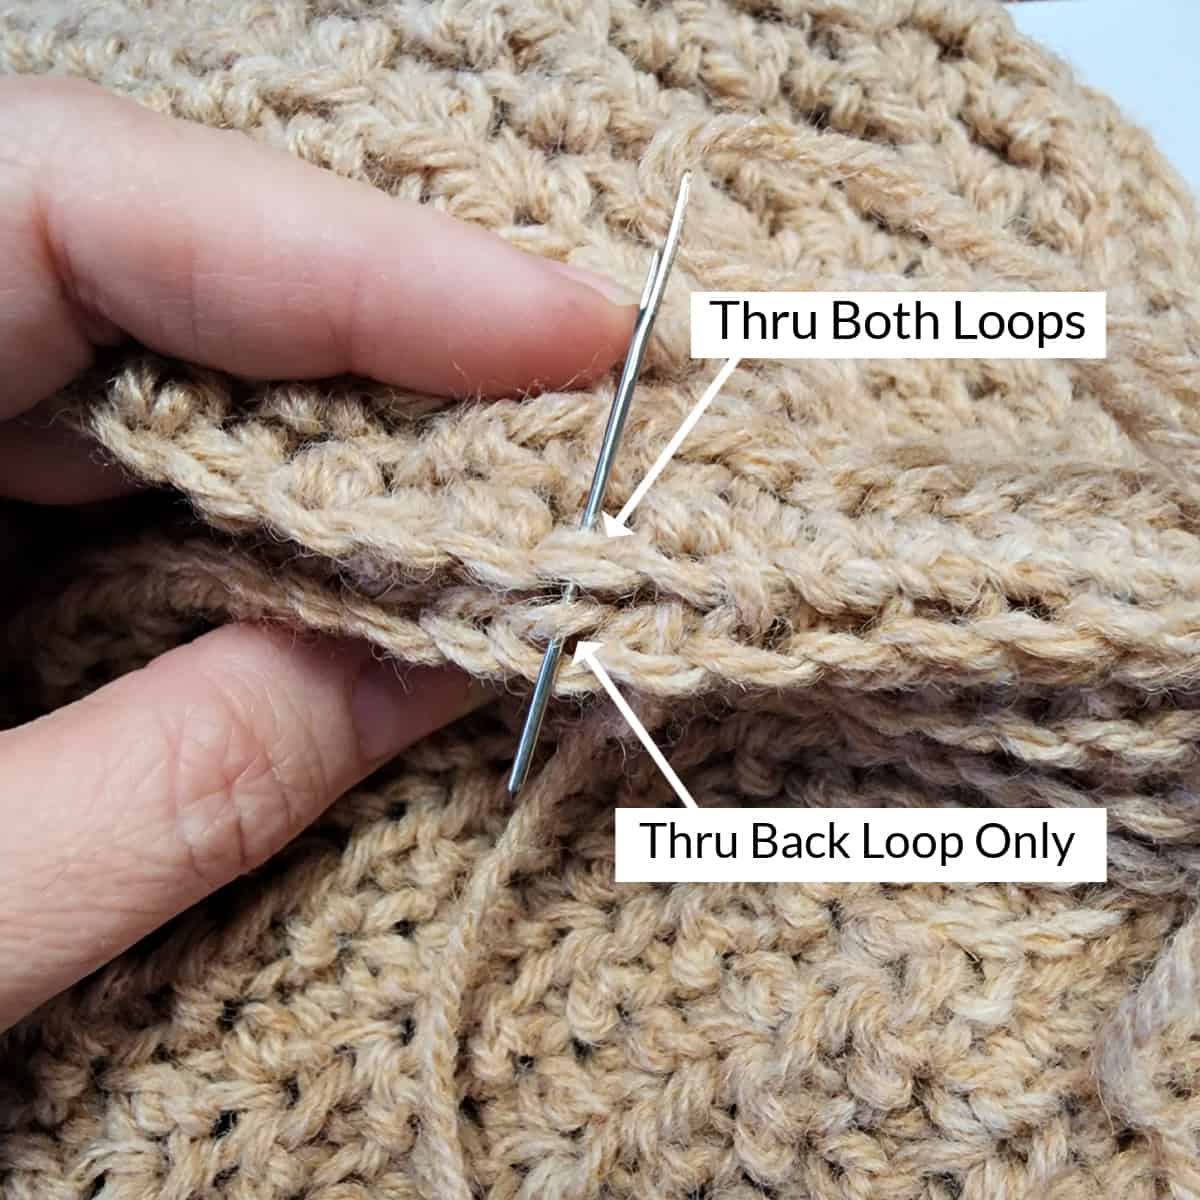 Yarn needle and arrows showing how to seam the middle of the crochet hat seam.